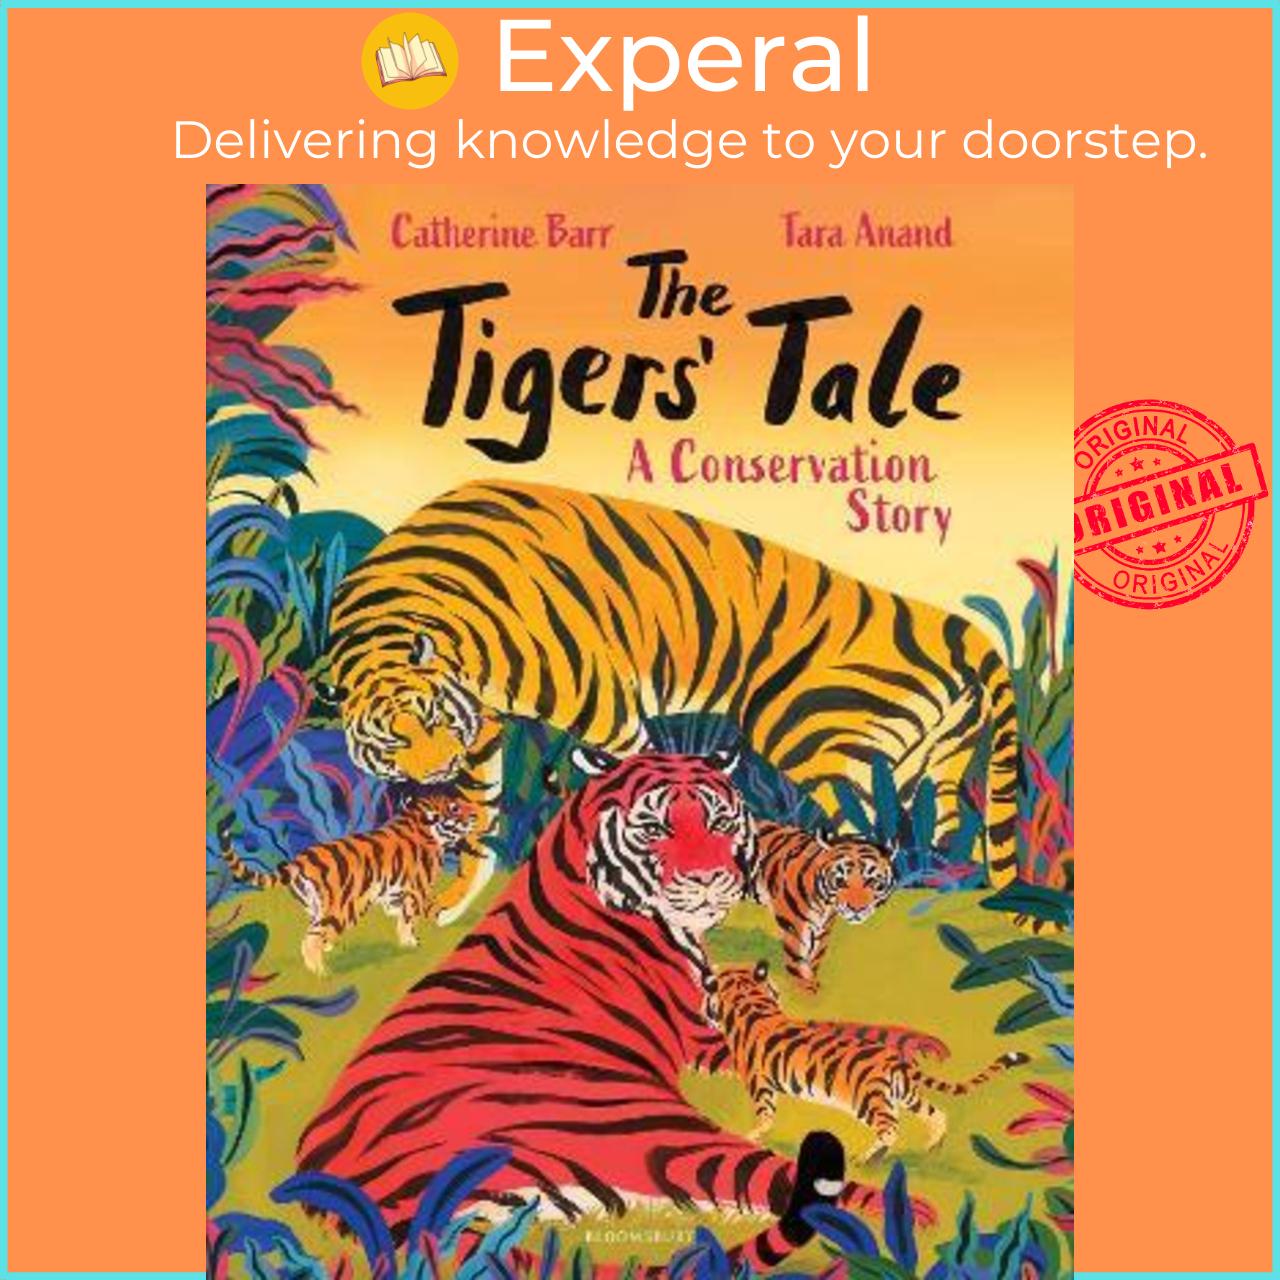 Hình ảnh Sách - The Tigers' Tale : A conservation story by Catherine Barr (UK edition, hardcover)